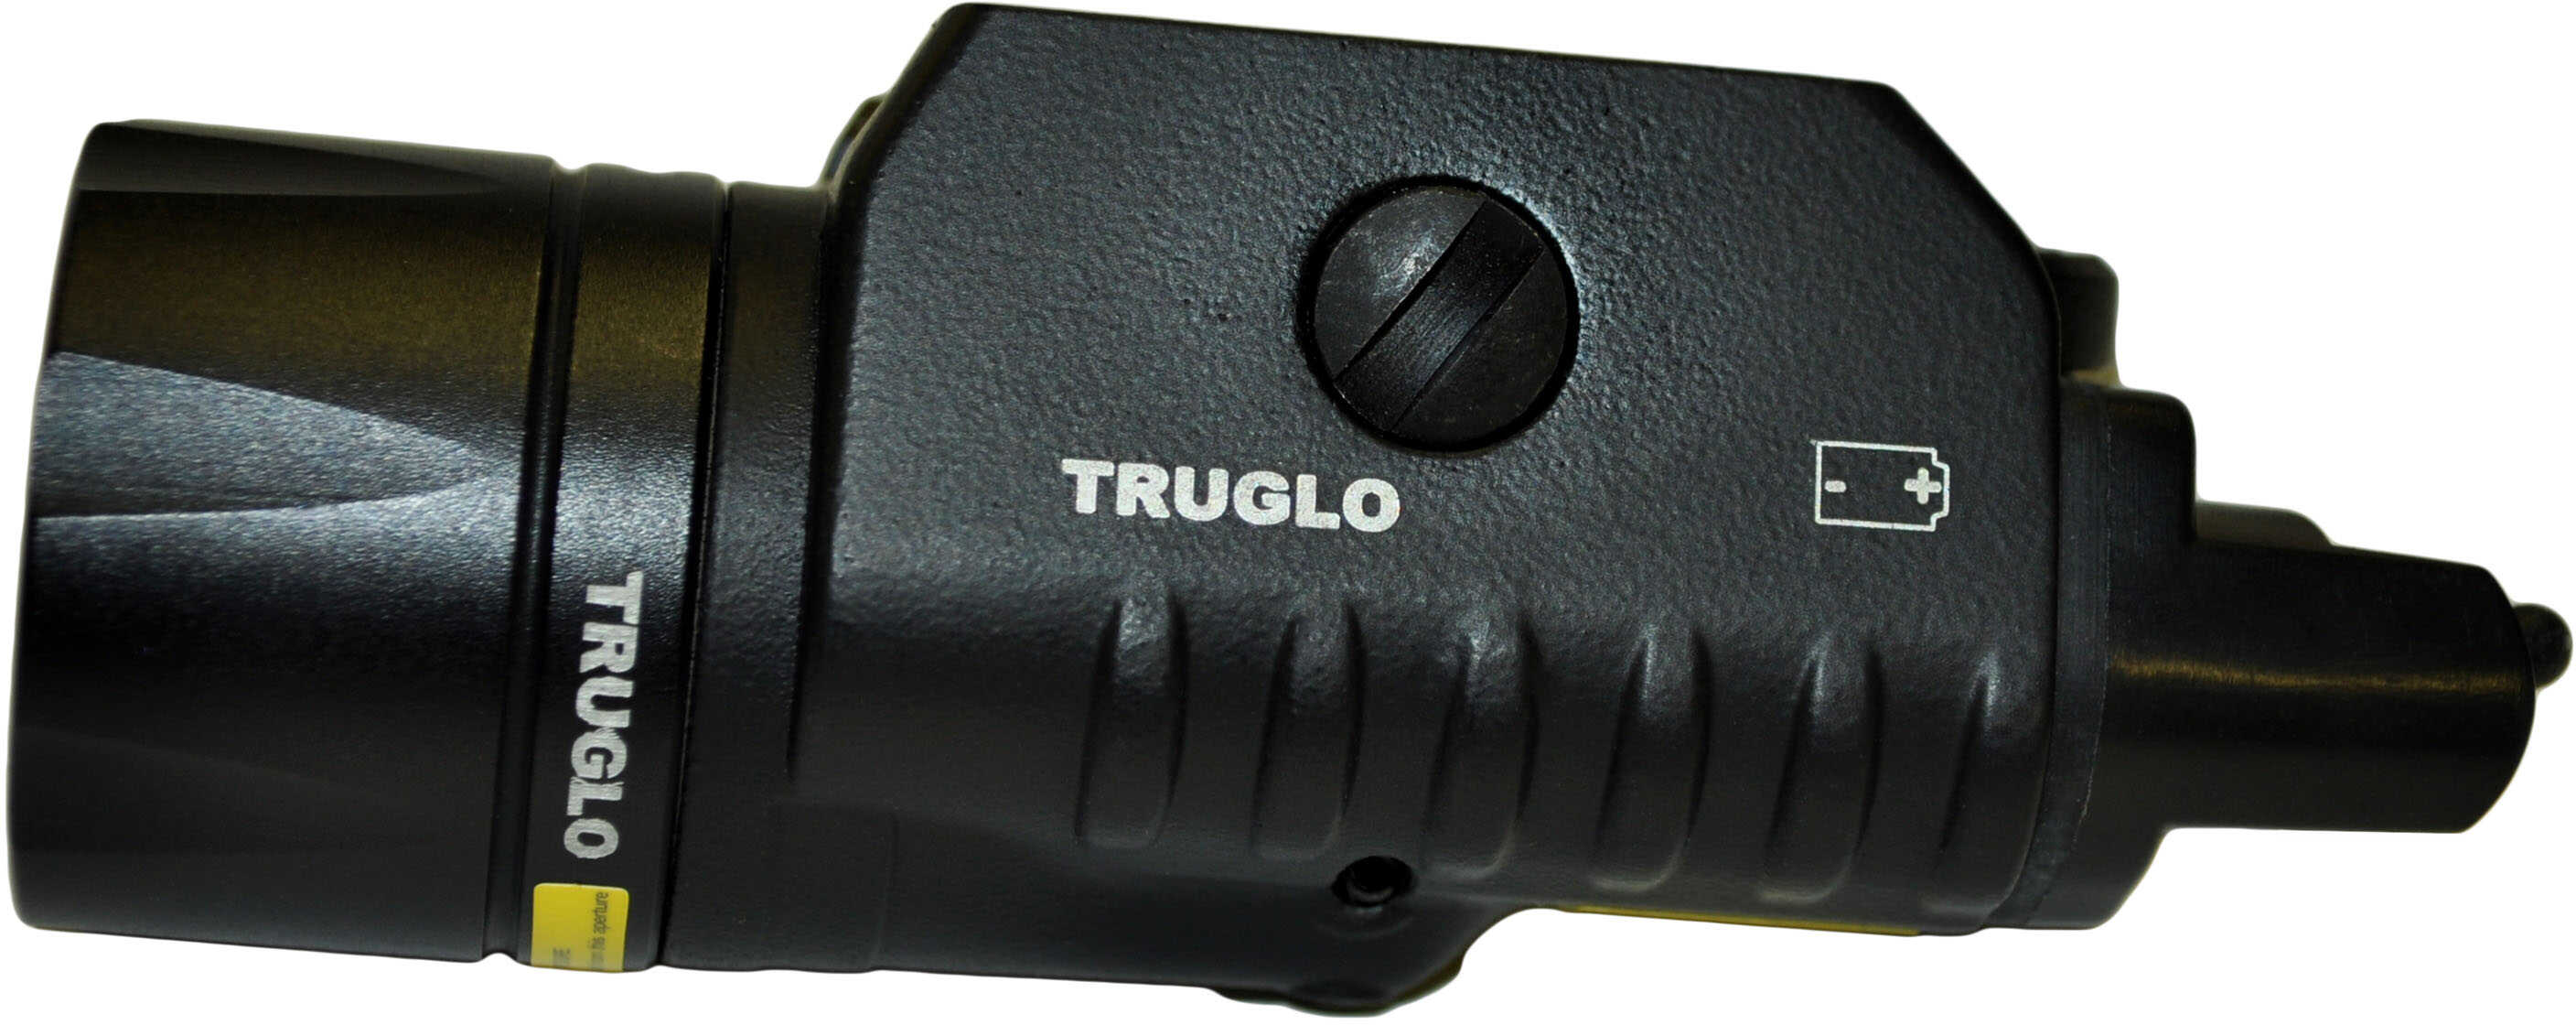 Truglo Tru-Point Laser Fits Picatinny Red Finish Quick-detach Lever Battery TG7650R